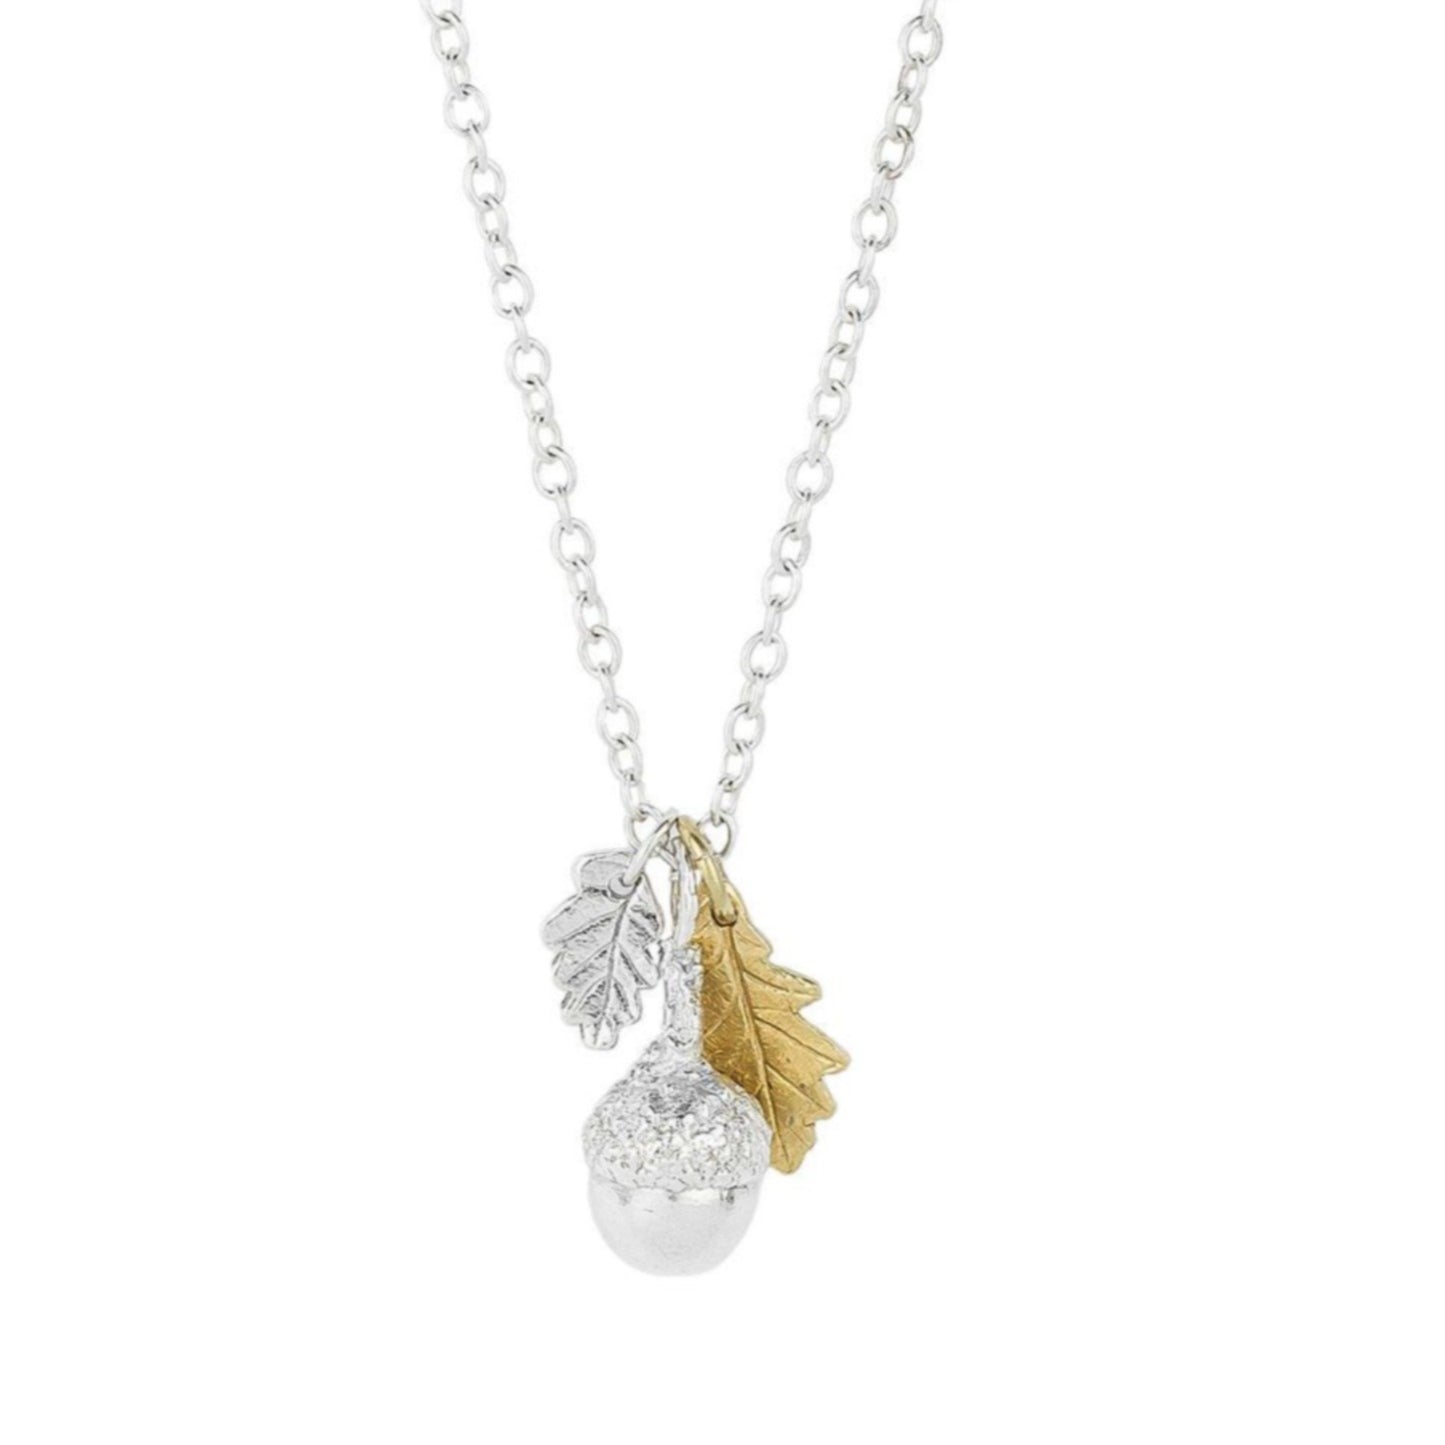 Load image into Gallery viewer, Acorn and oak leaf cluster necklace - Bethan Jarvis Fingerprint Jewellery
